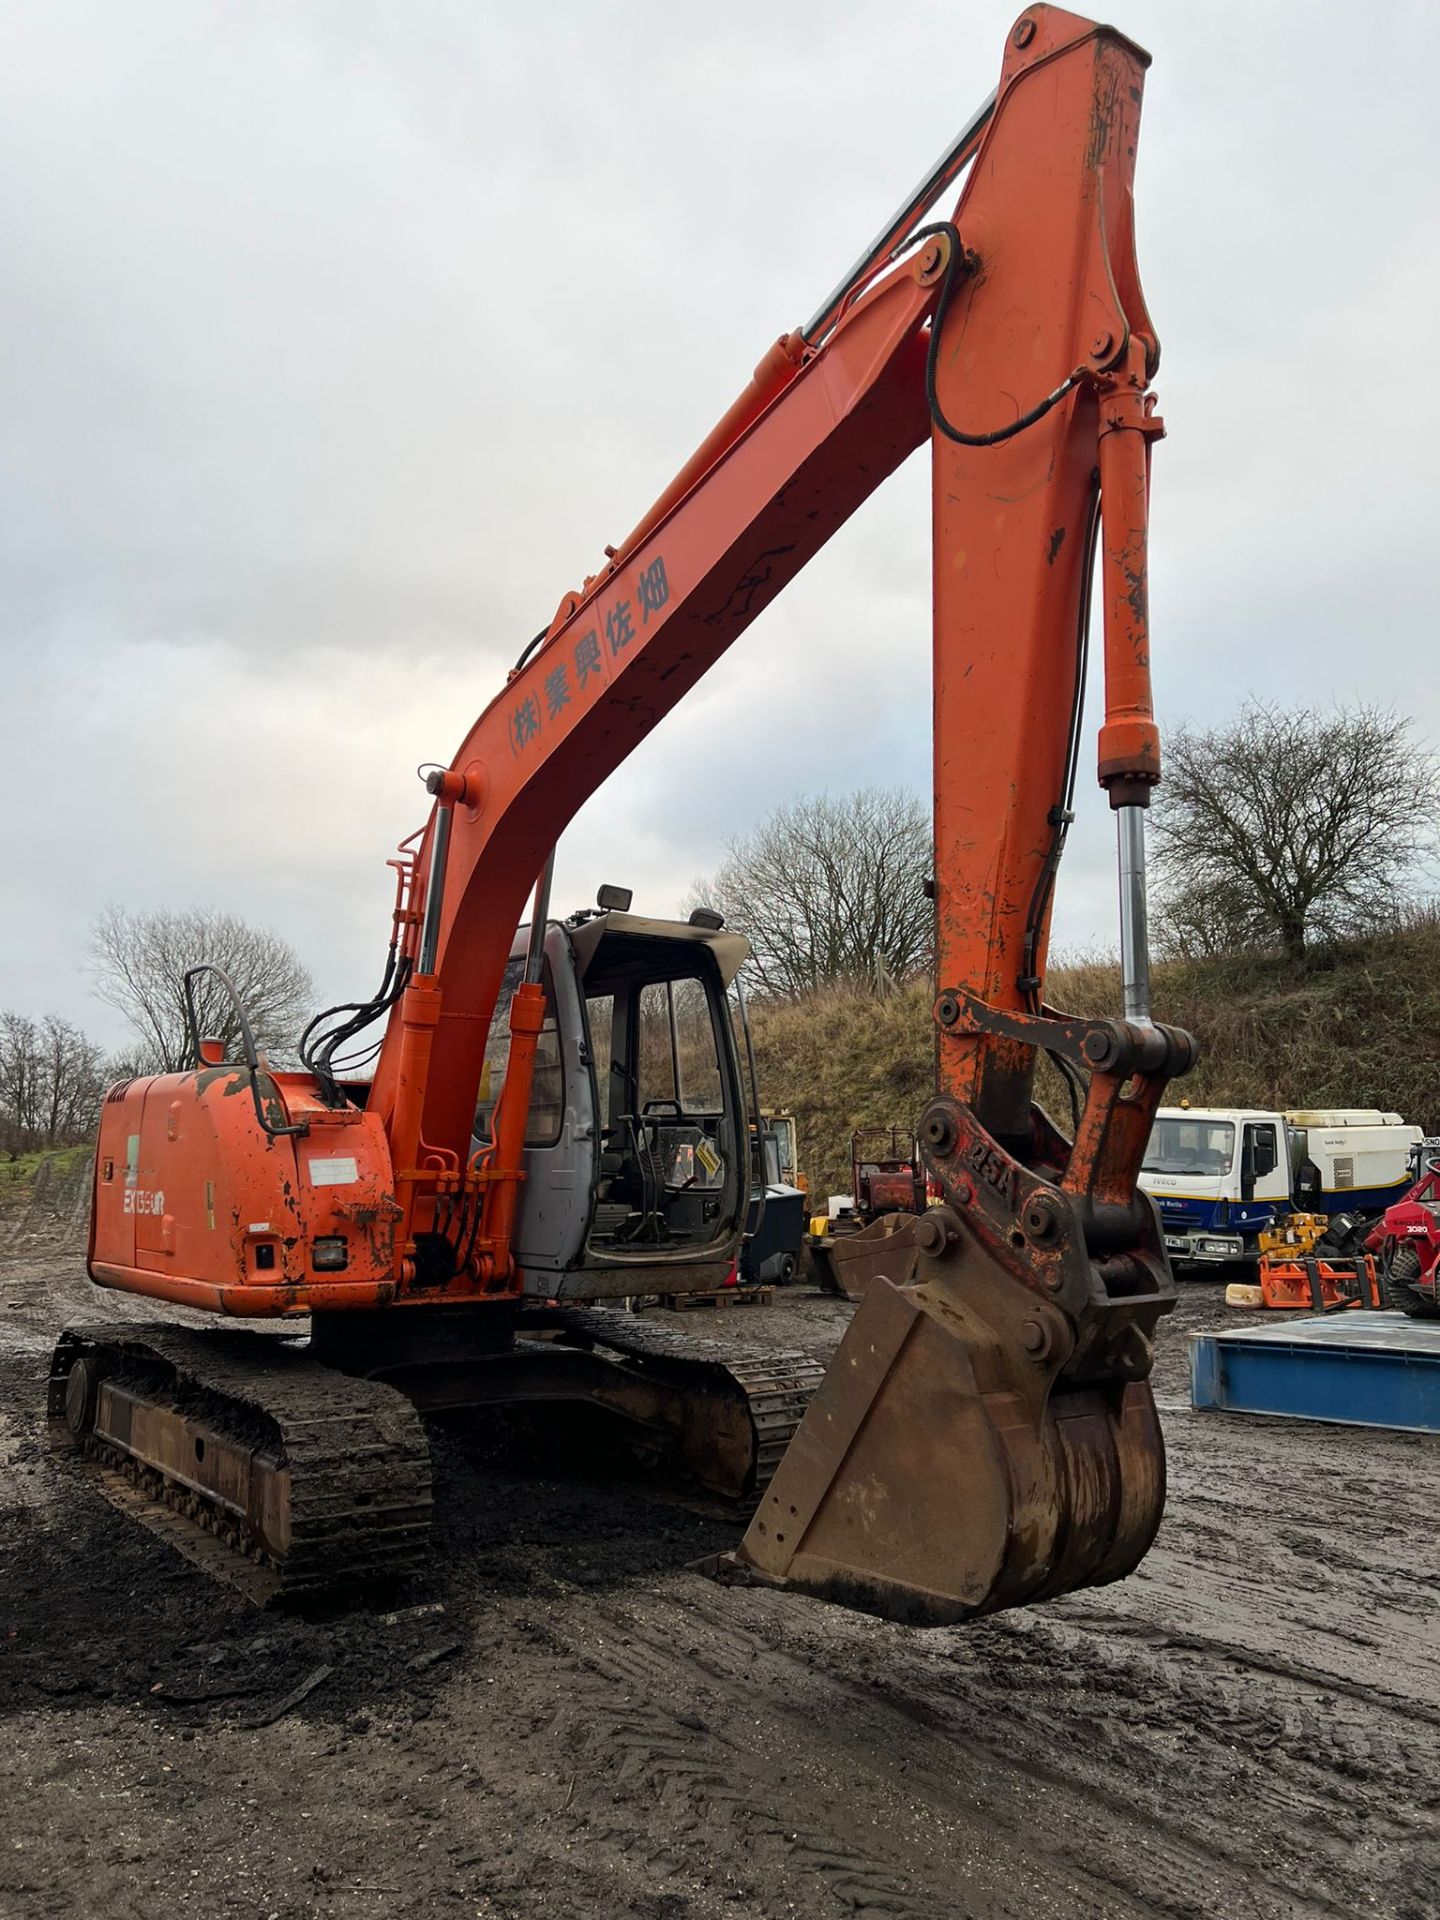 HITACHI EX135 13 TON TRACKED DIGGER / EXCAVATOR, 5183 RECORDED HOURS, RUNS WORKS AND DIGS *PLUS VAT* - Image 3 of 8